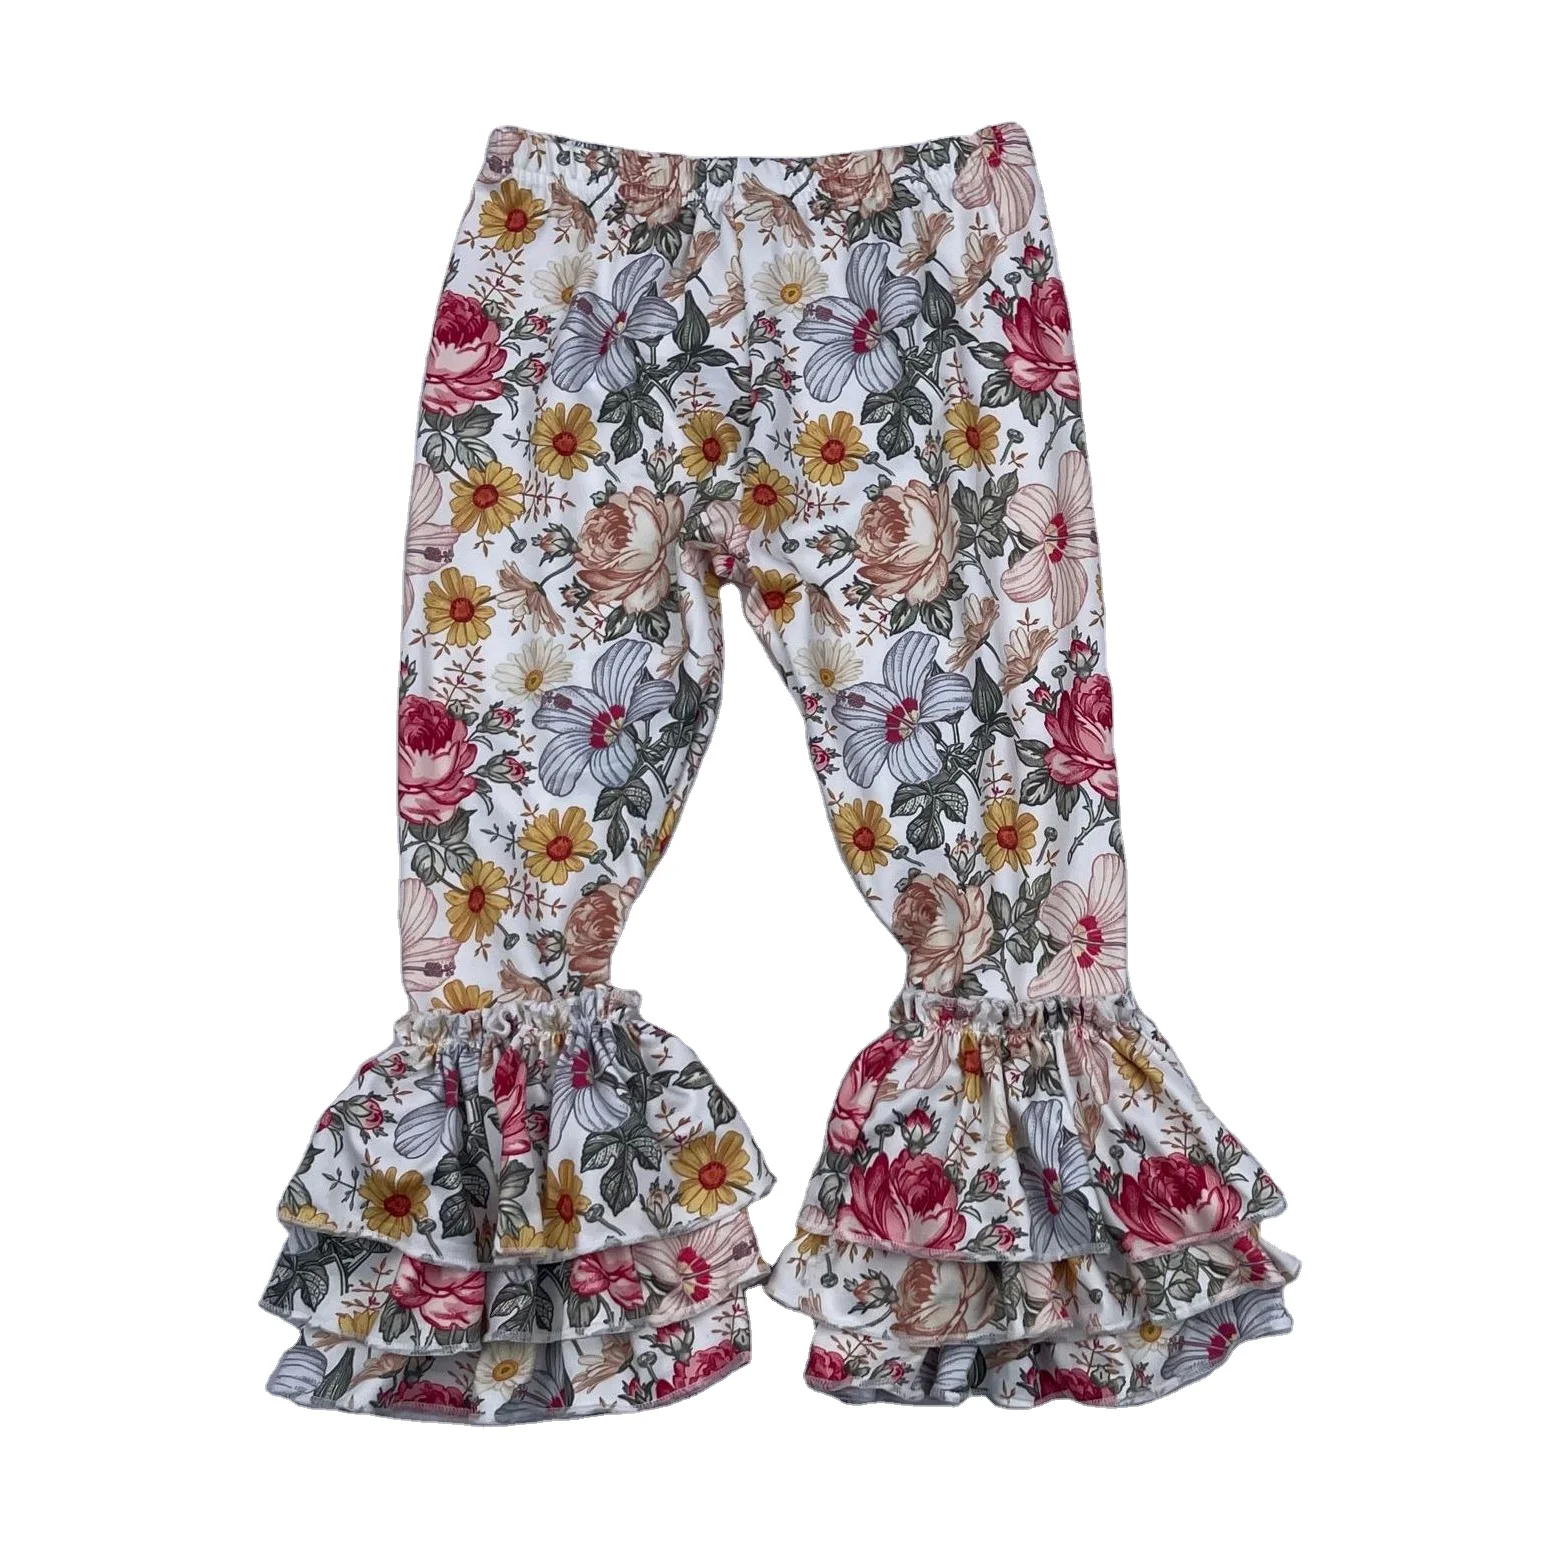 Floral Icing Ruffle Long Pants Boutique Leggings for Toddler Baby Girl Bottoms 